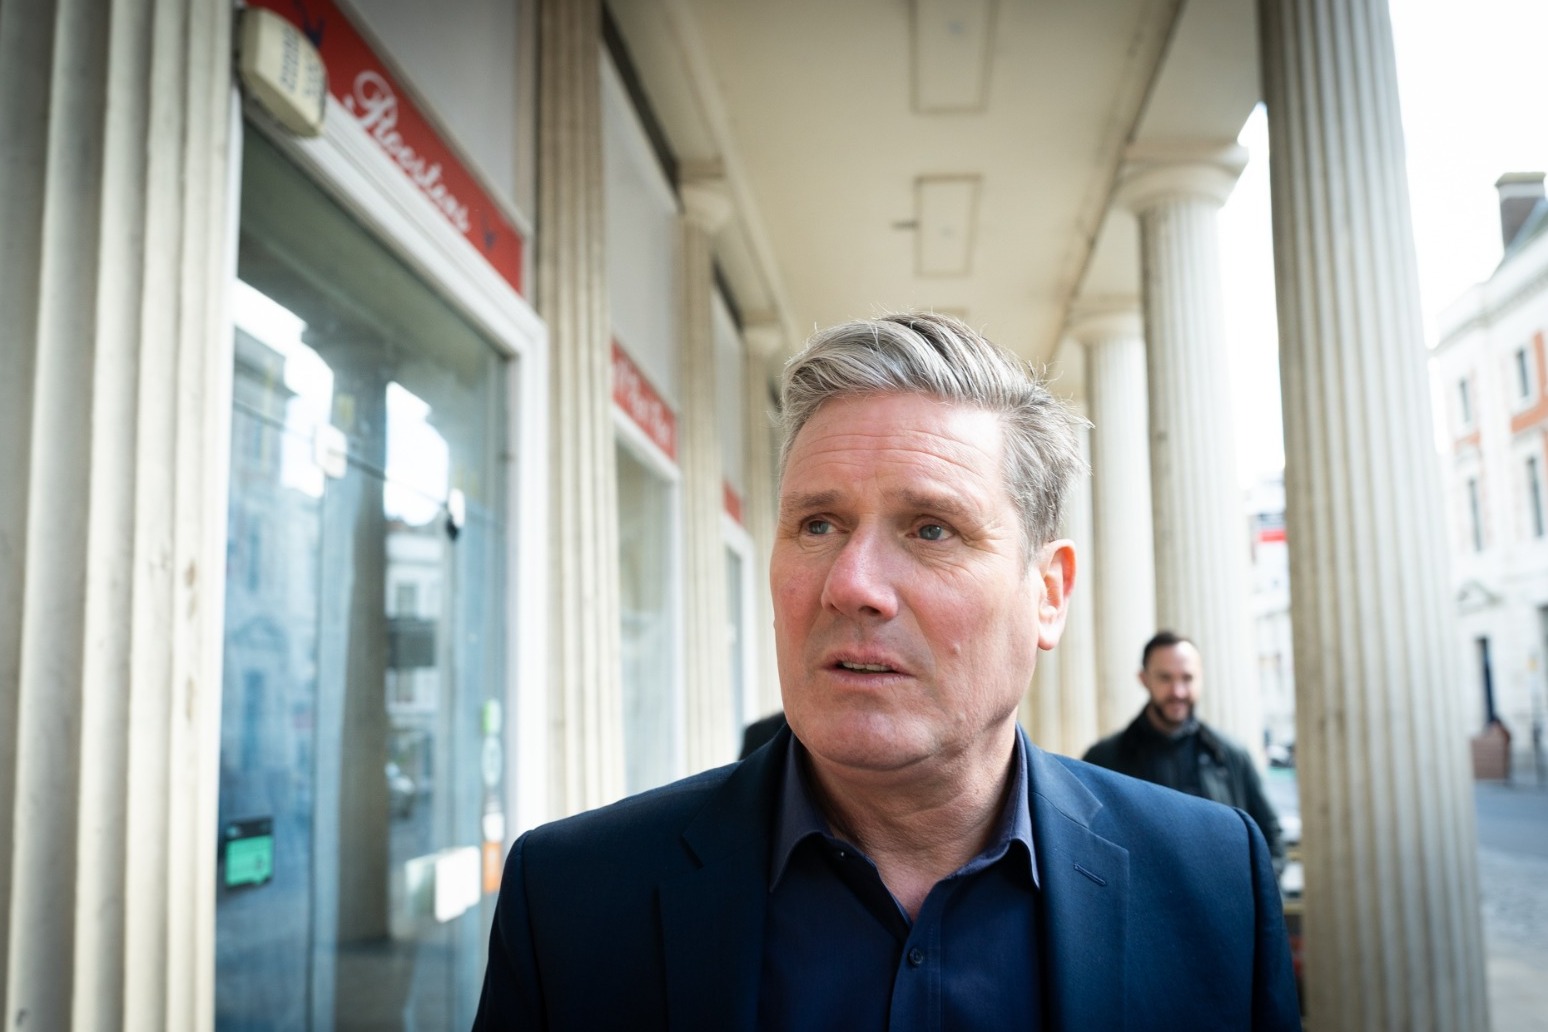 Starmer accuses Sunak of ‘rank hypocrisy’ for using ‘schemes’ to avoid tax 